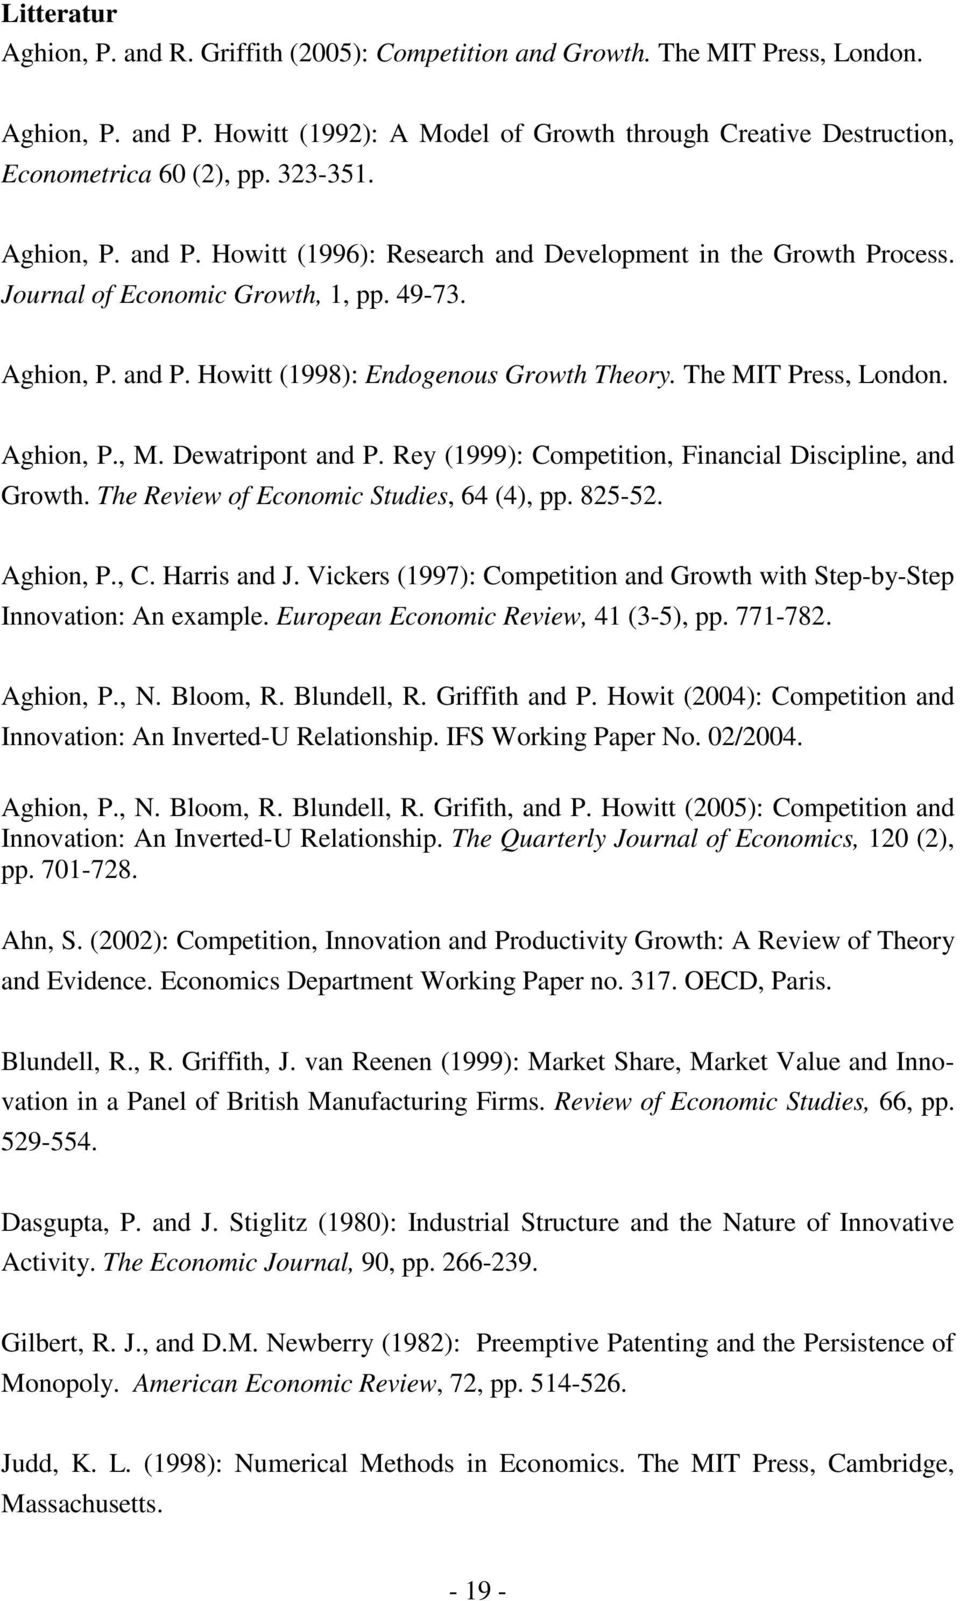 The MIT Press, London. Aghion, P., M. Dewatripont and P. Rey (999): Competition, Financial Discipline, and Growth. The Review of Economic Studies, 64 (4), pp. 825-52. Aghion, P., C. Harris and J.